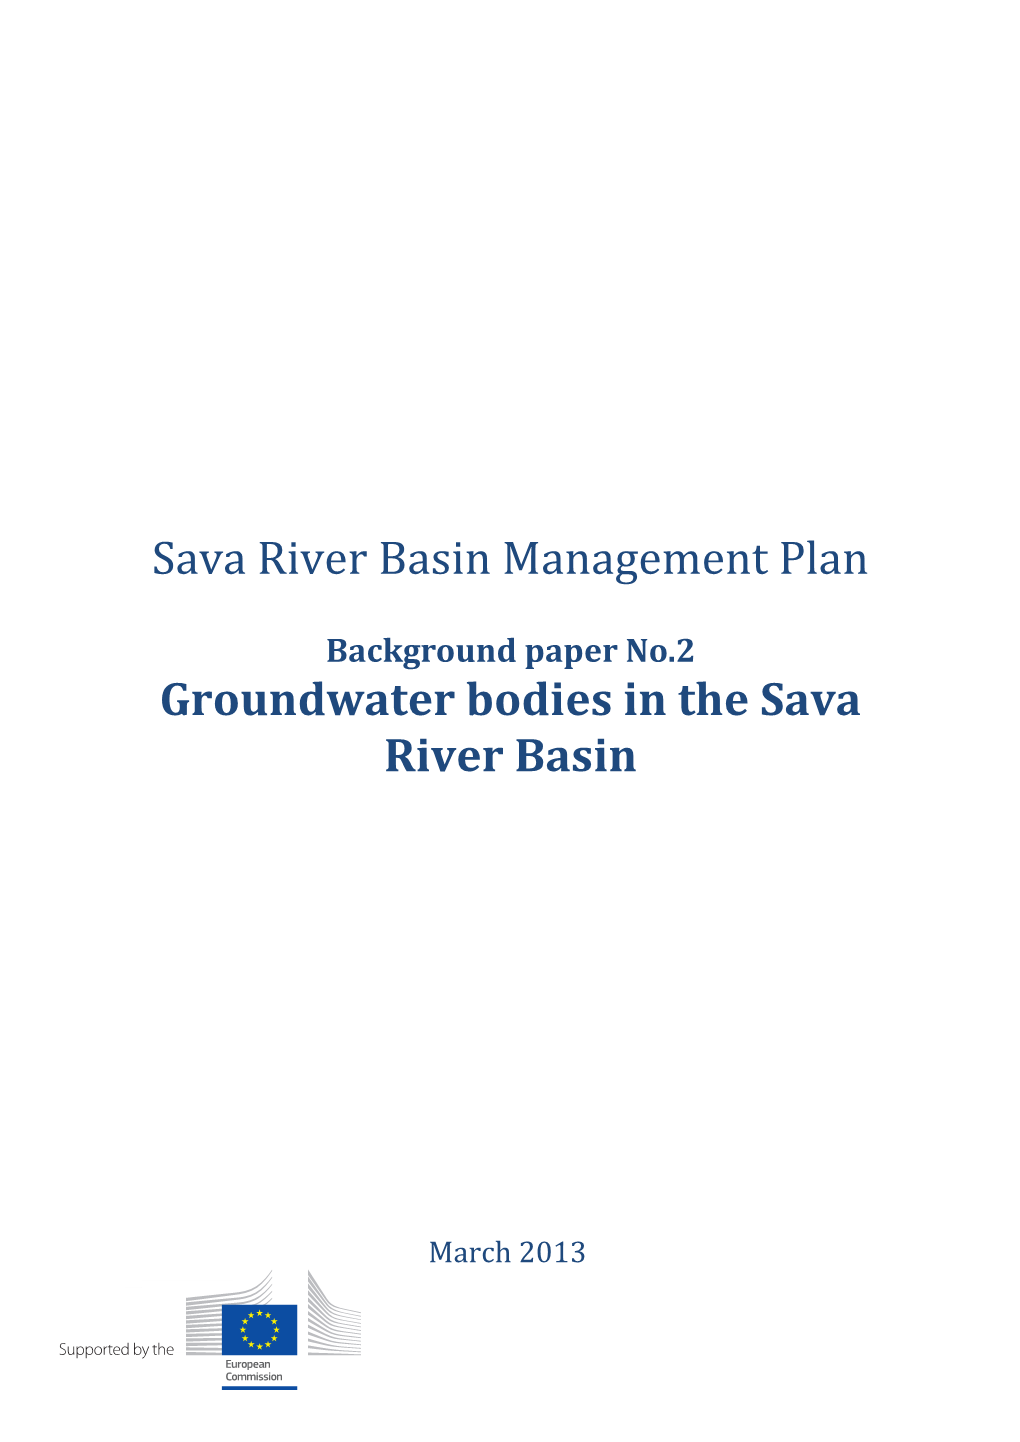 Groundwater Bodies in the Sava River Basin